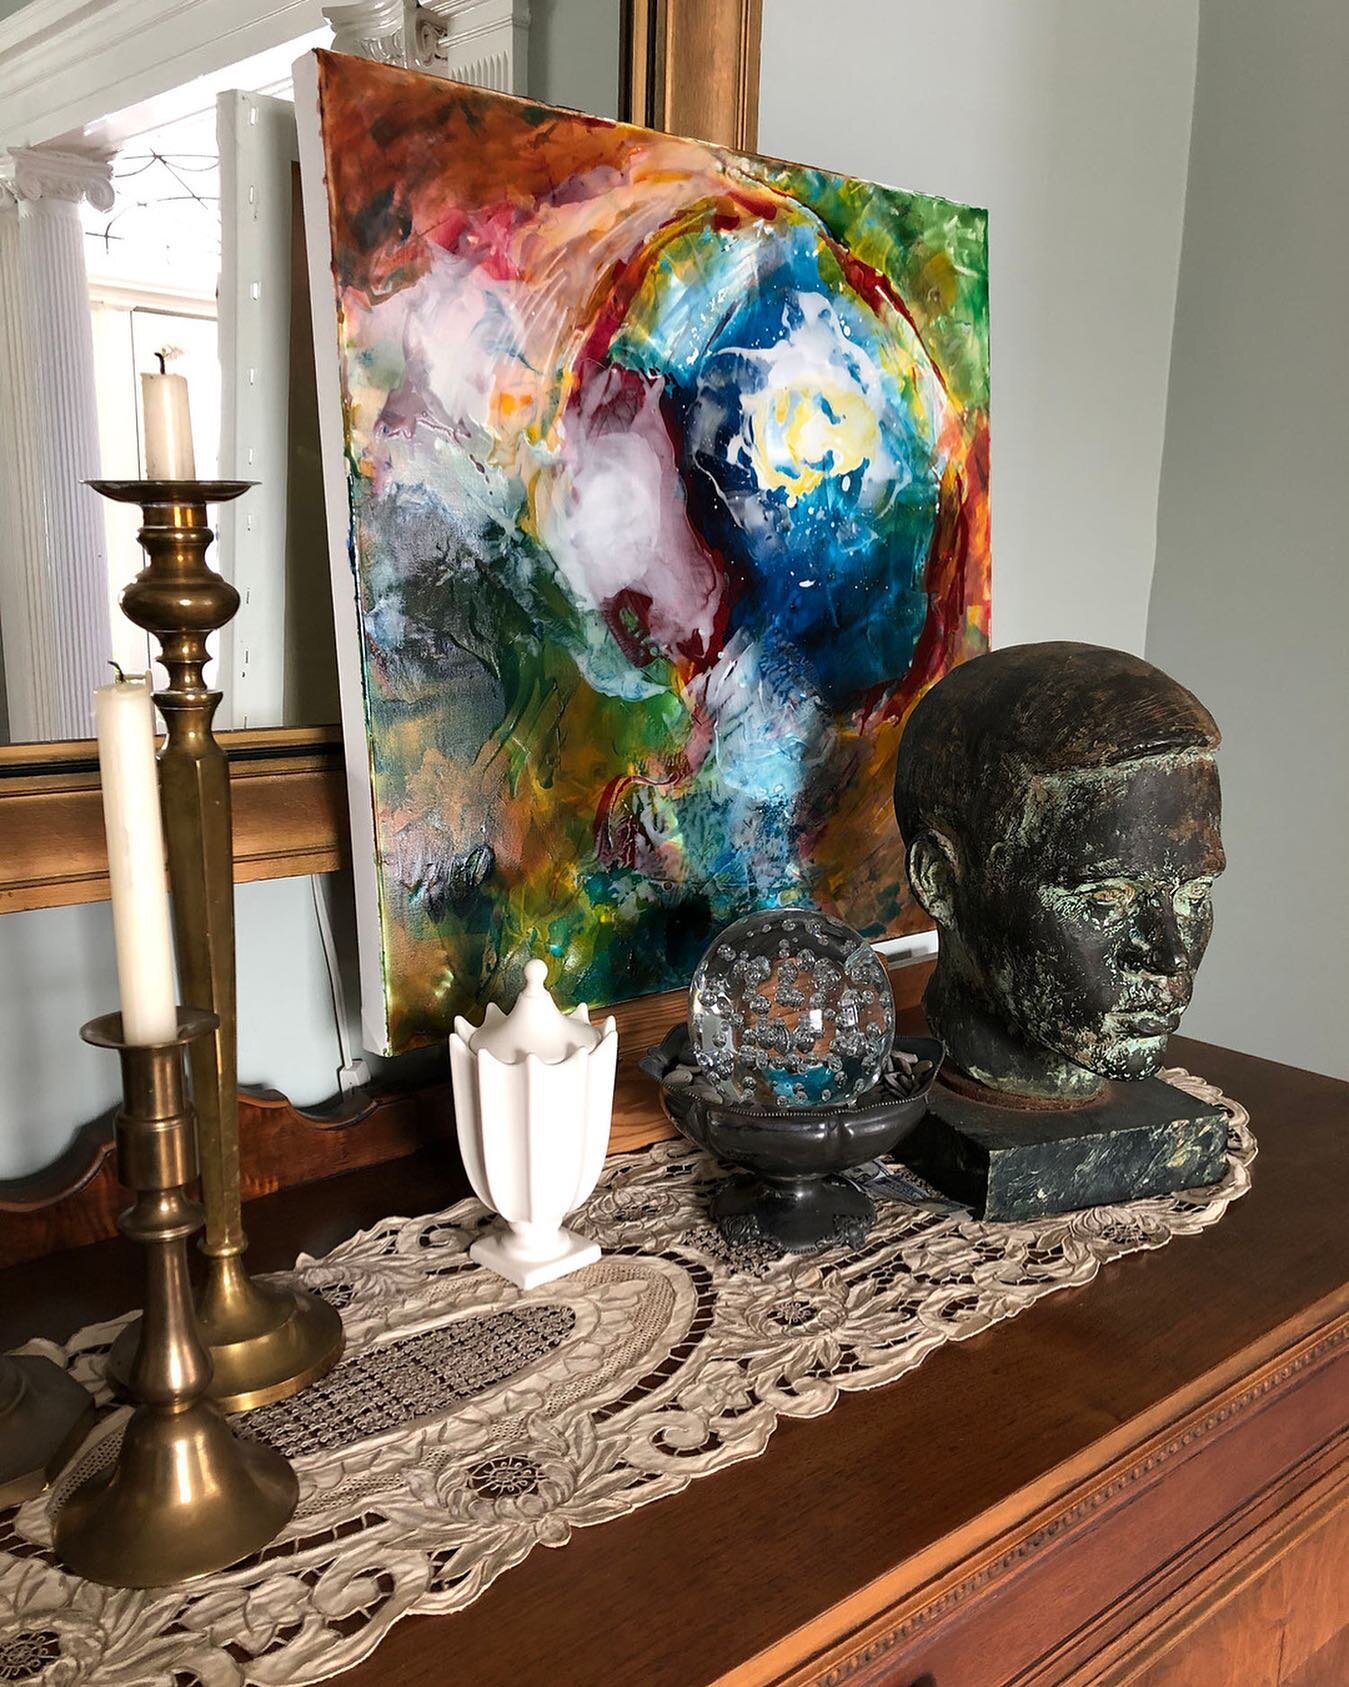 Sunshine in our dining room. My painting &quot;The Blue&quot;. The bronze sculpture is by Art Cislo.
.
.
. #creativeenergy #abstractartpainter #contemporaryart #contemporarypainter #contemporaryartcollectors #interioredesigners #moderninterior #livin